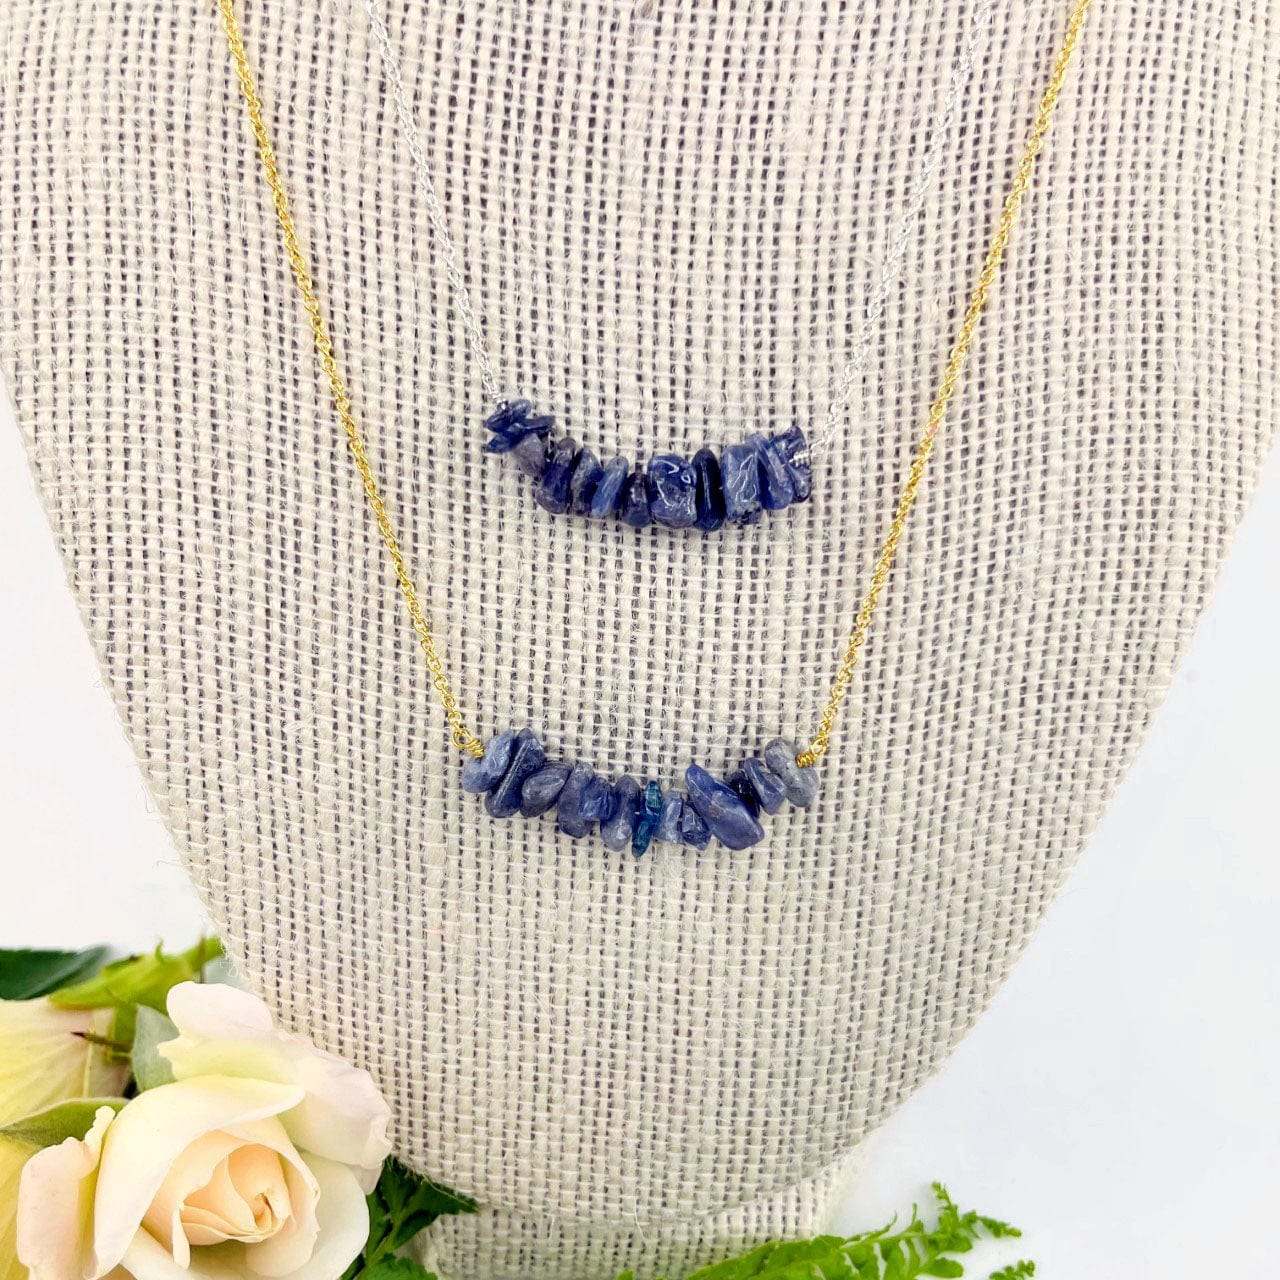 Sapphire Stone Necklace - September Birthstone - Gold over Sterling or Sterling Silver Adjustable Length up close view